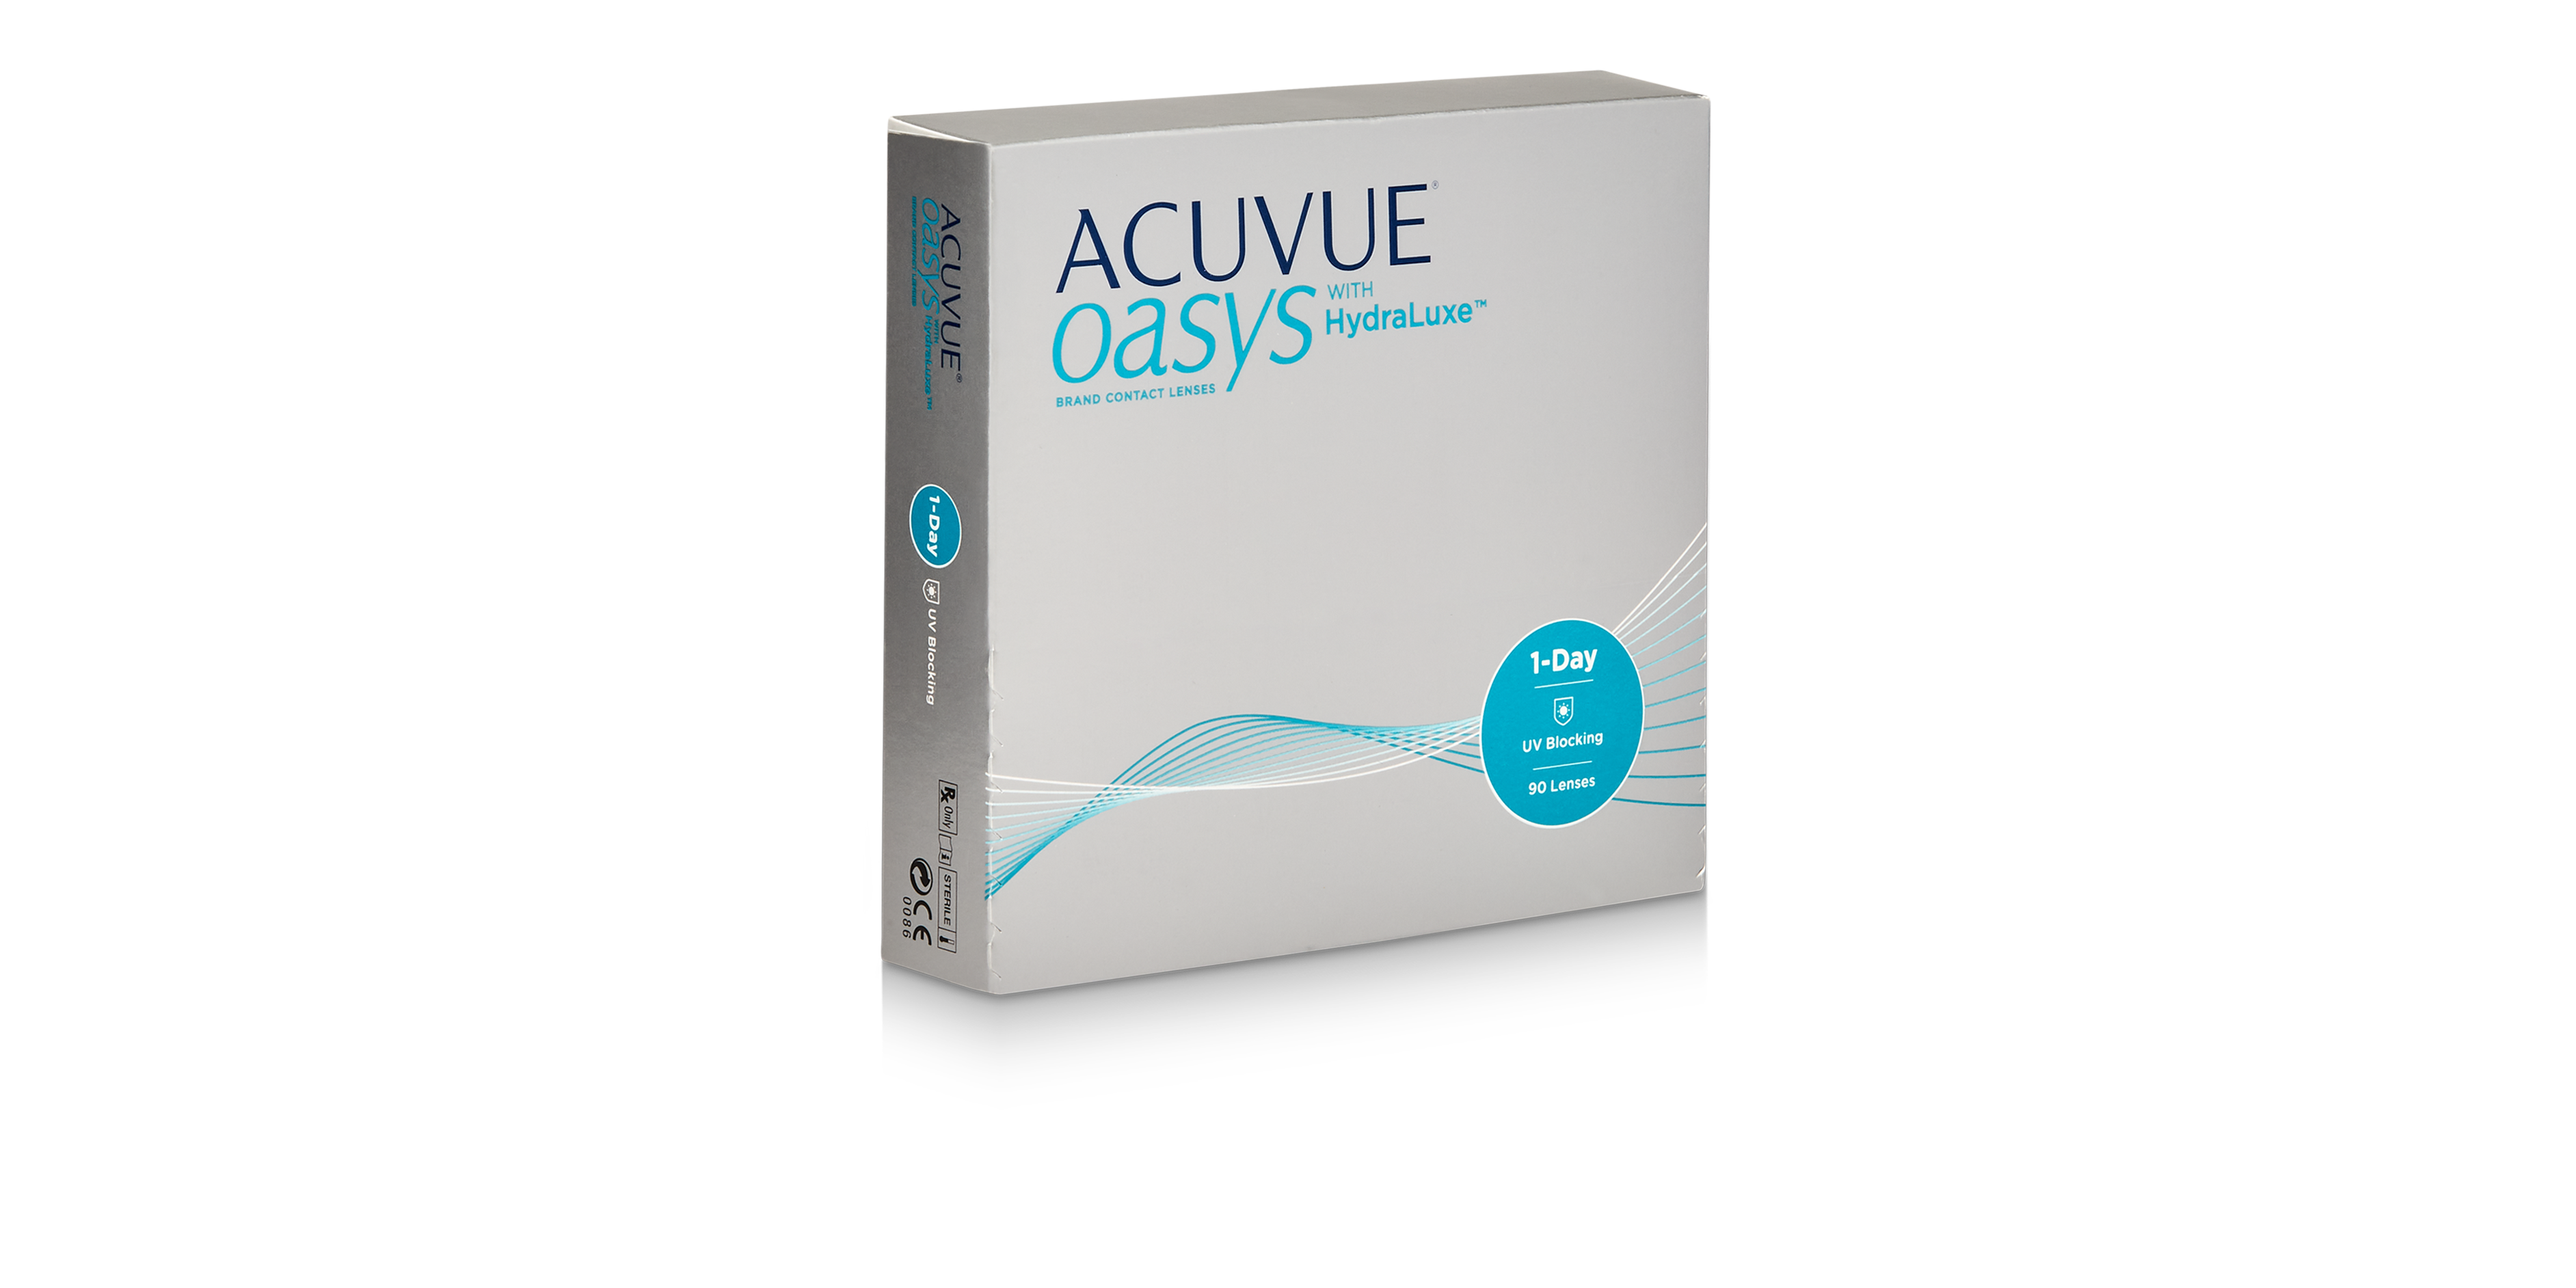 Acuvue OASYS HydraLuxe 1 Day 90 Contact Lenses | LensCrafters